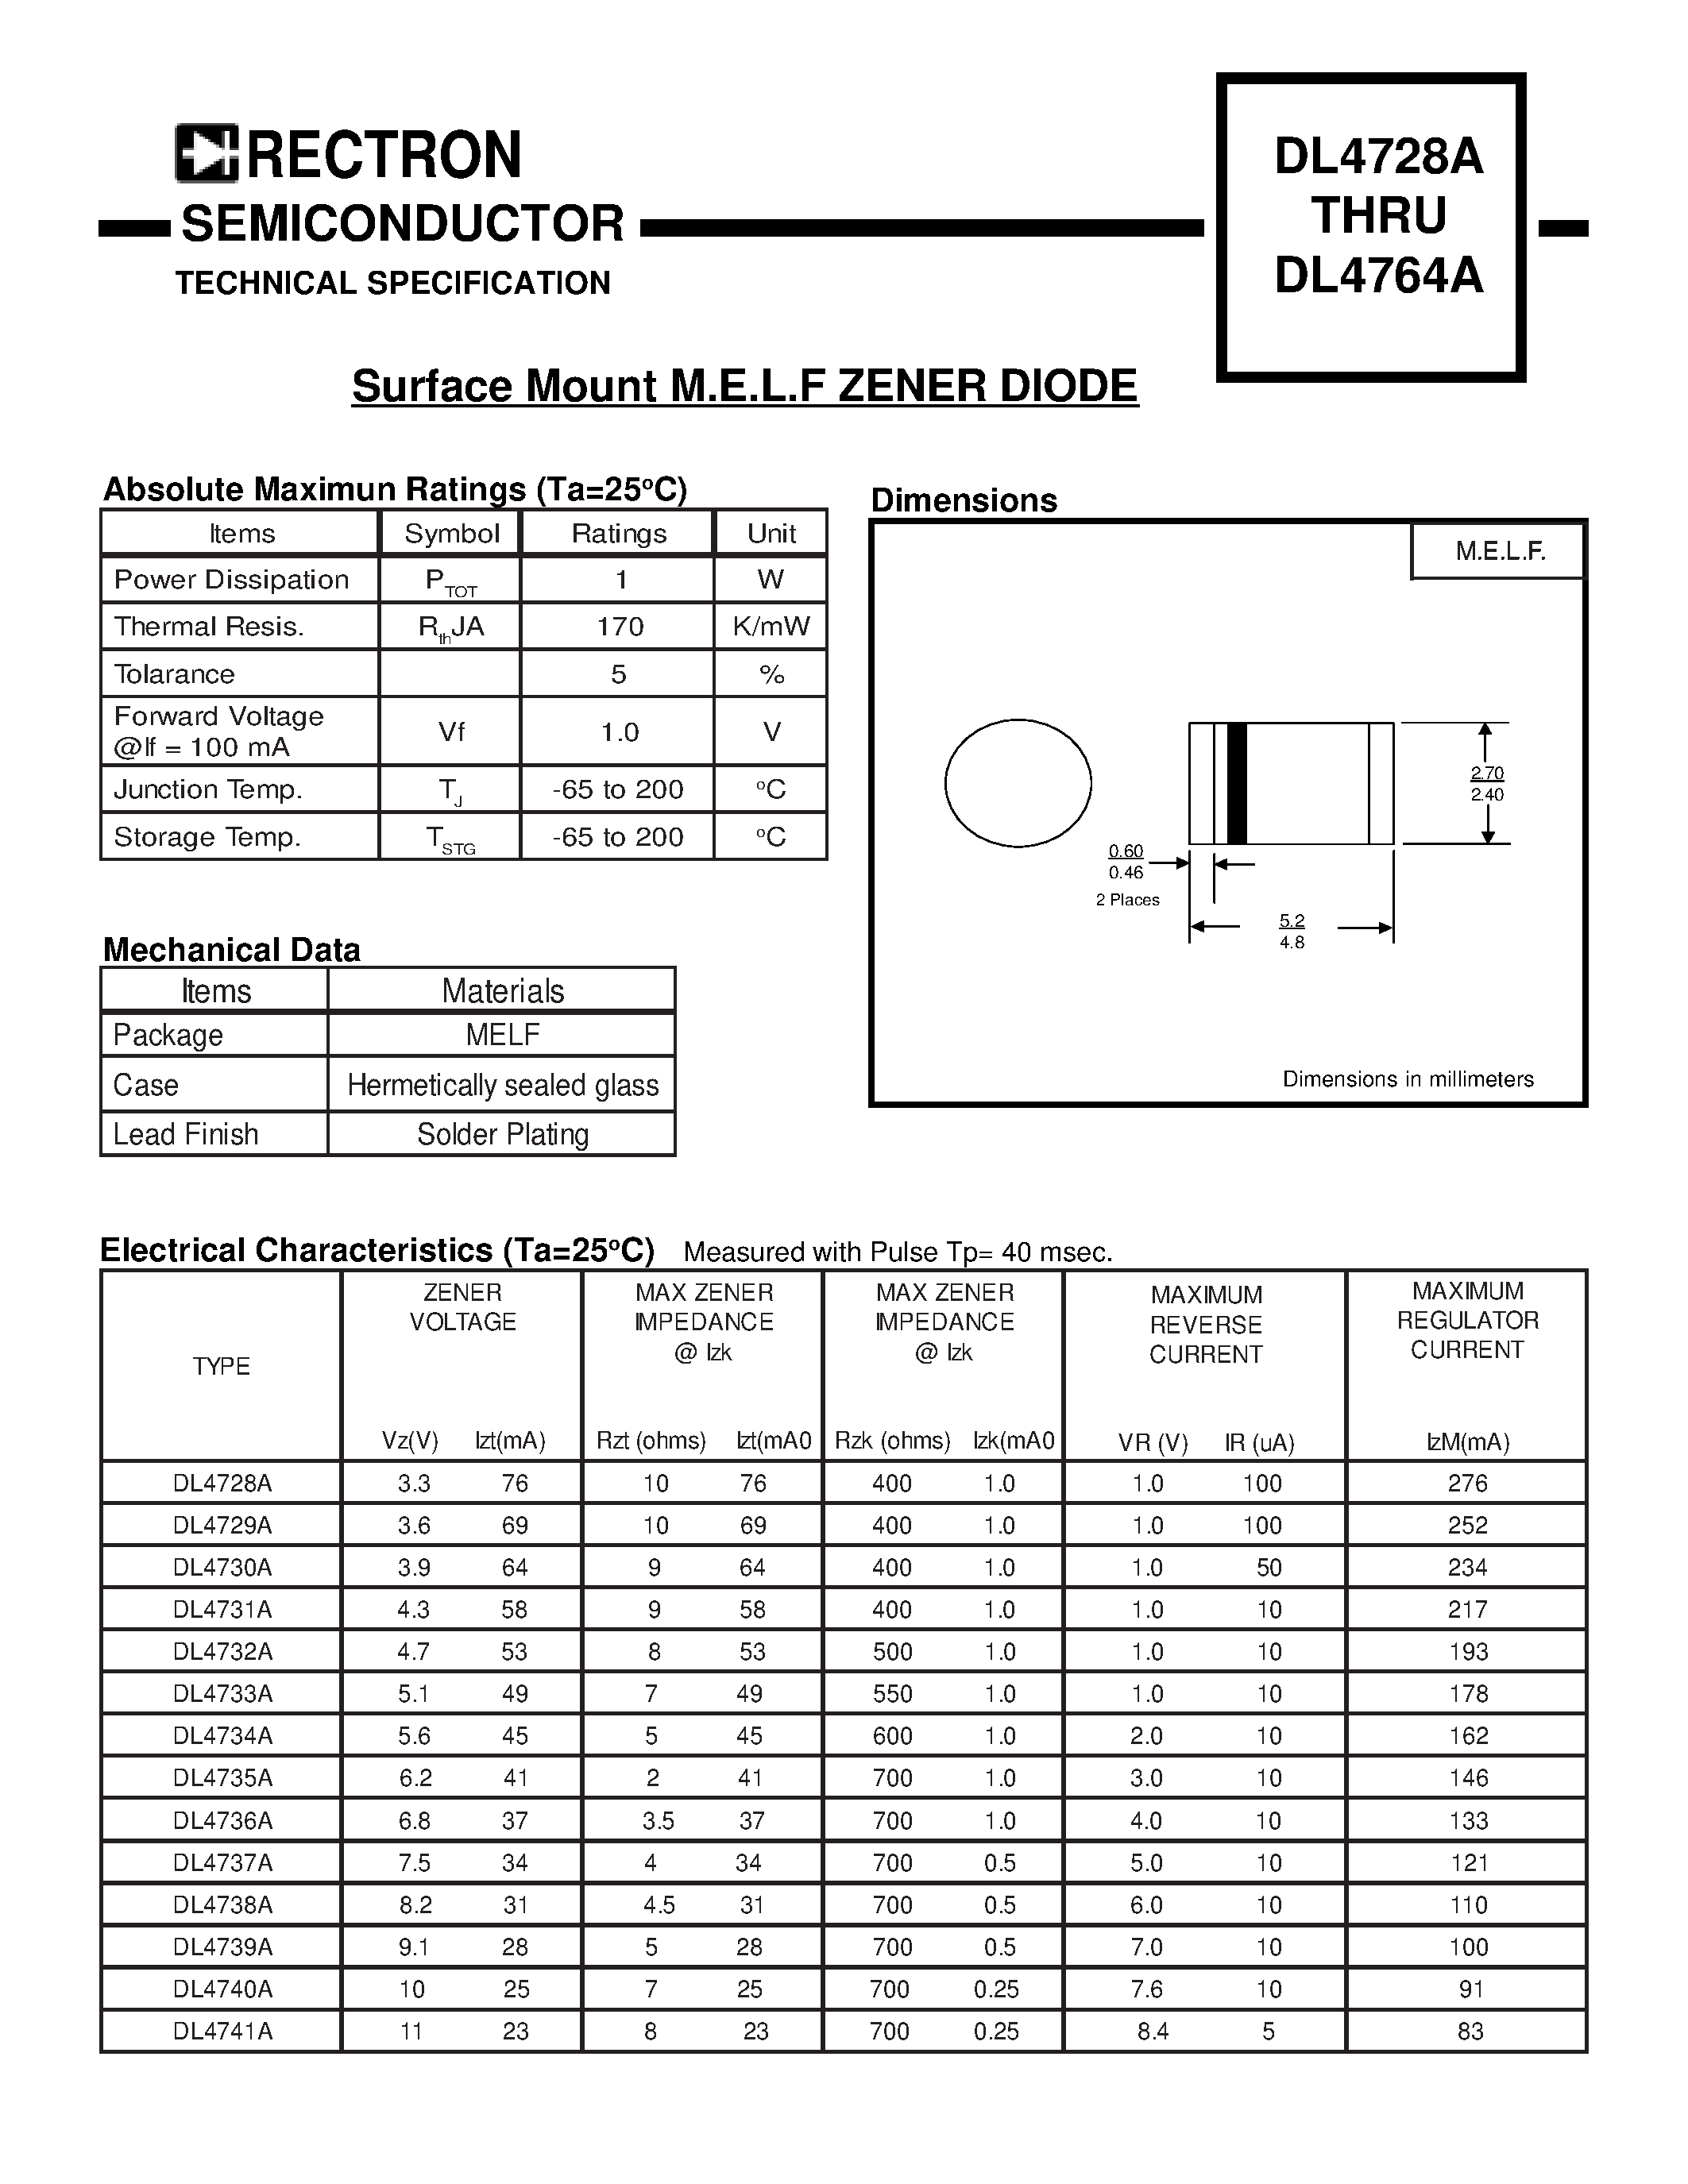 Datasheet DL4744A - Surface Mount M.E.L.F ZENER DIODE page 1